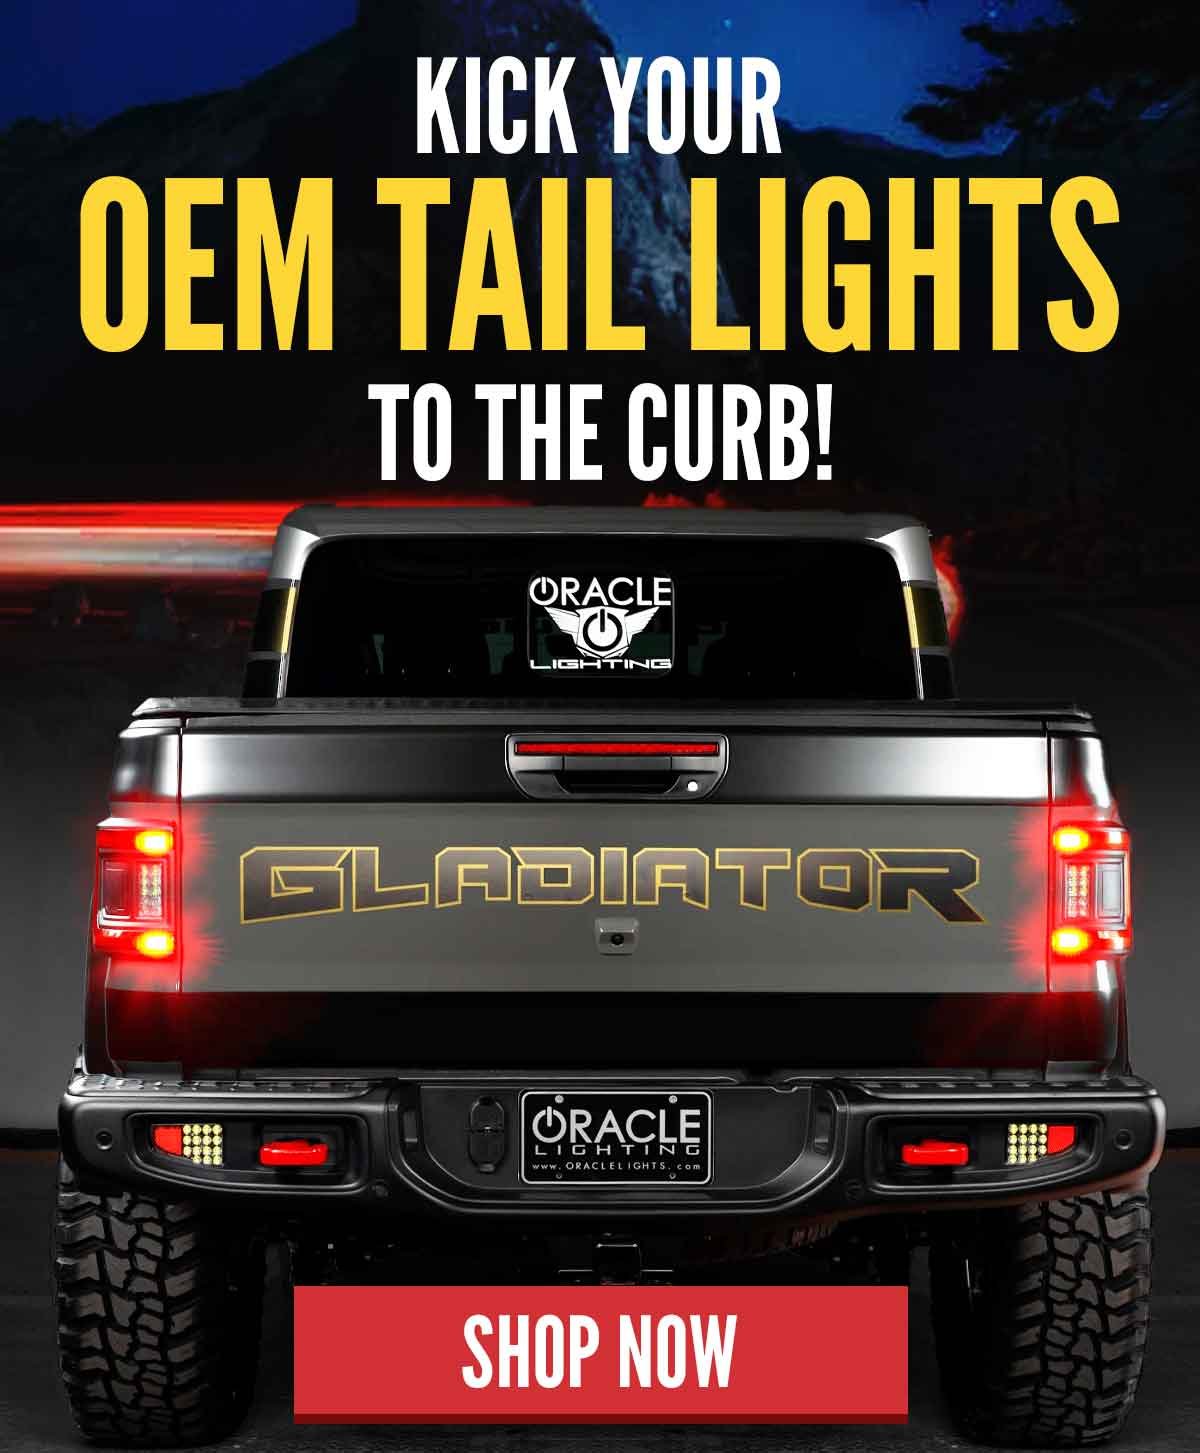 Kick Your OEM Tail Lights To The Curb!